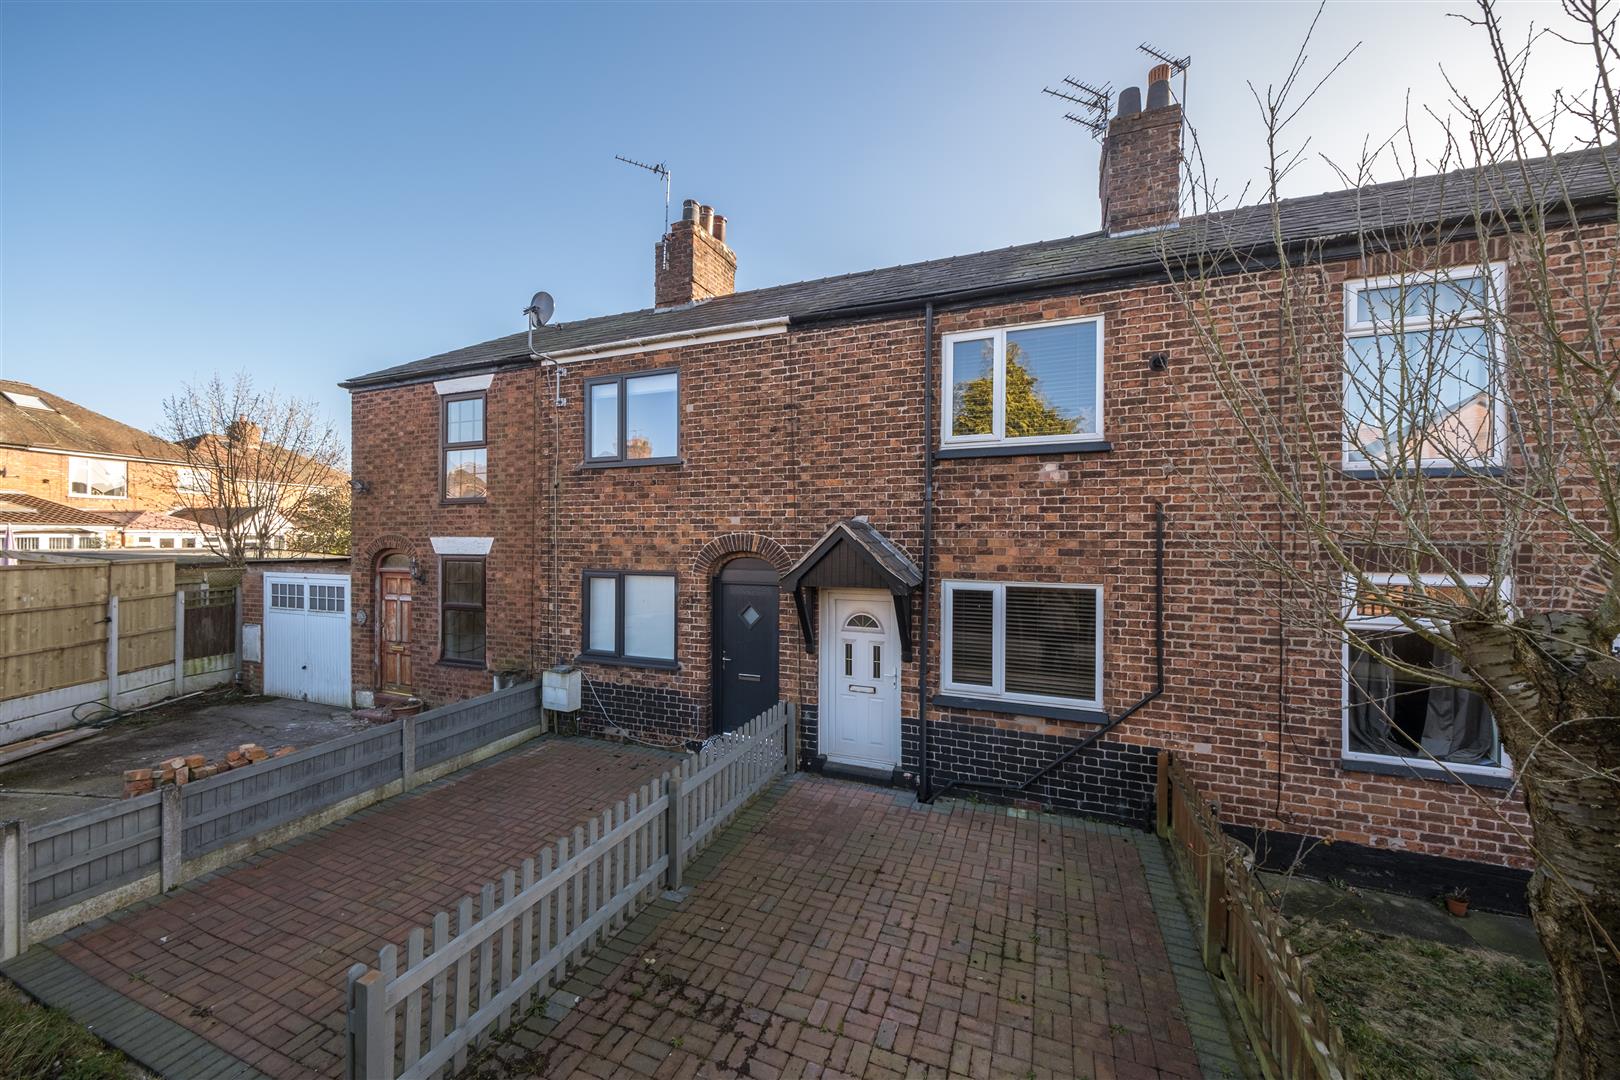 2 bedroom  Terraced House for Sale in Northwich